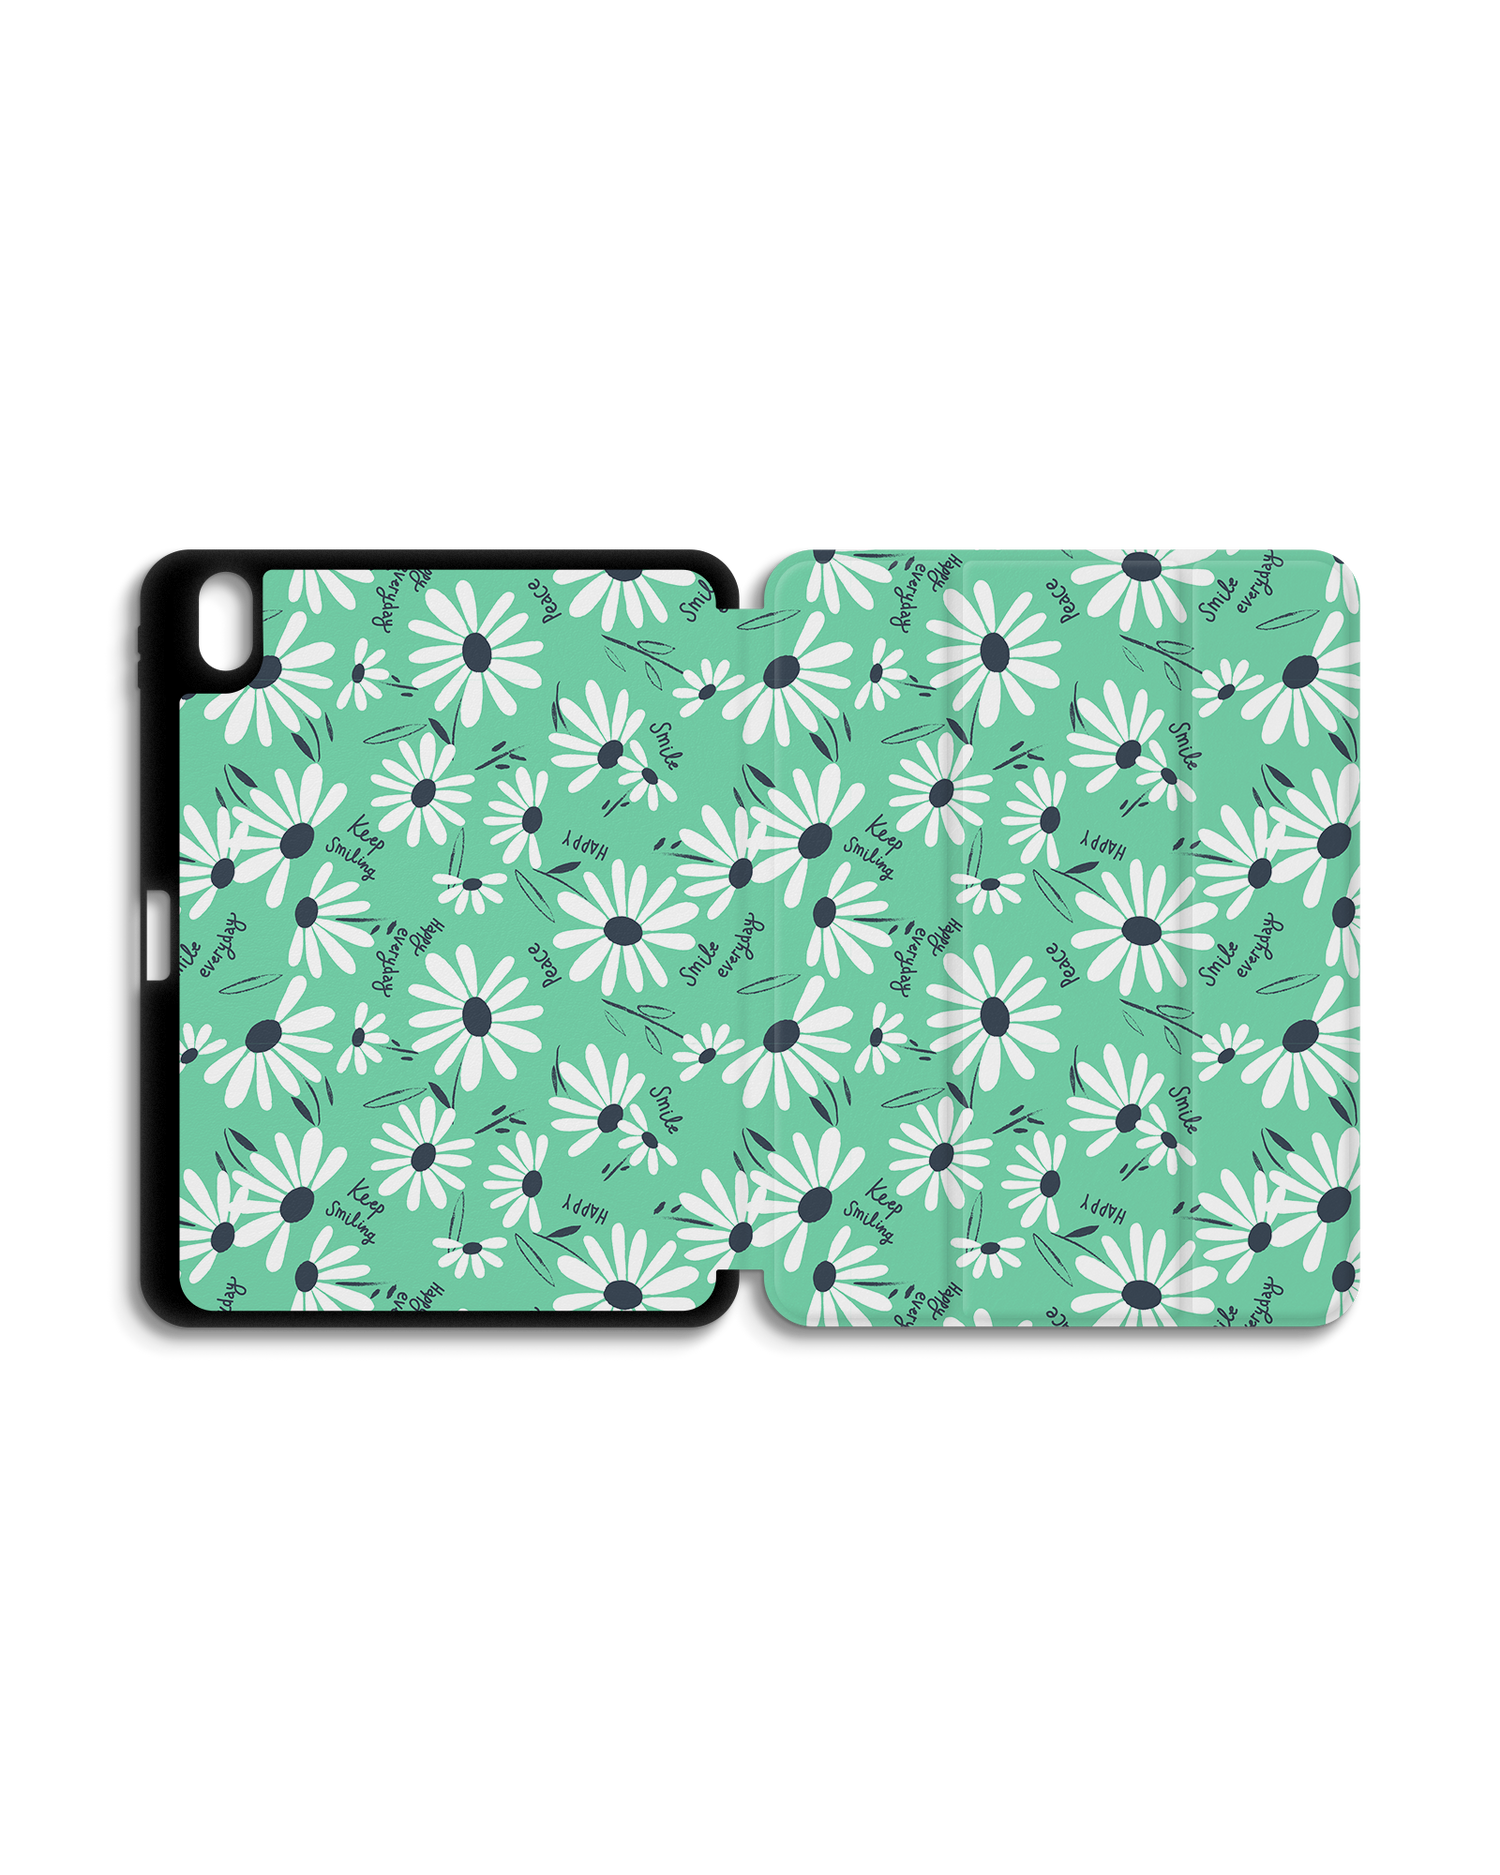 Positive Daisies iPad Case with Pencil Holder for Apple iPad (10th Generation): Opened exterior view